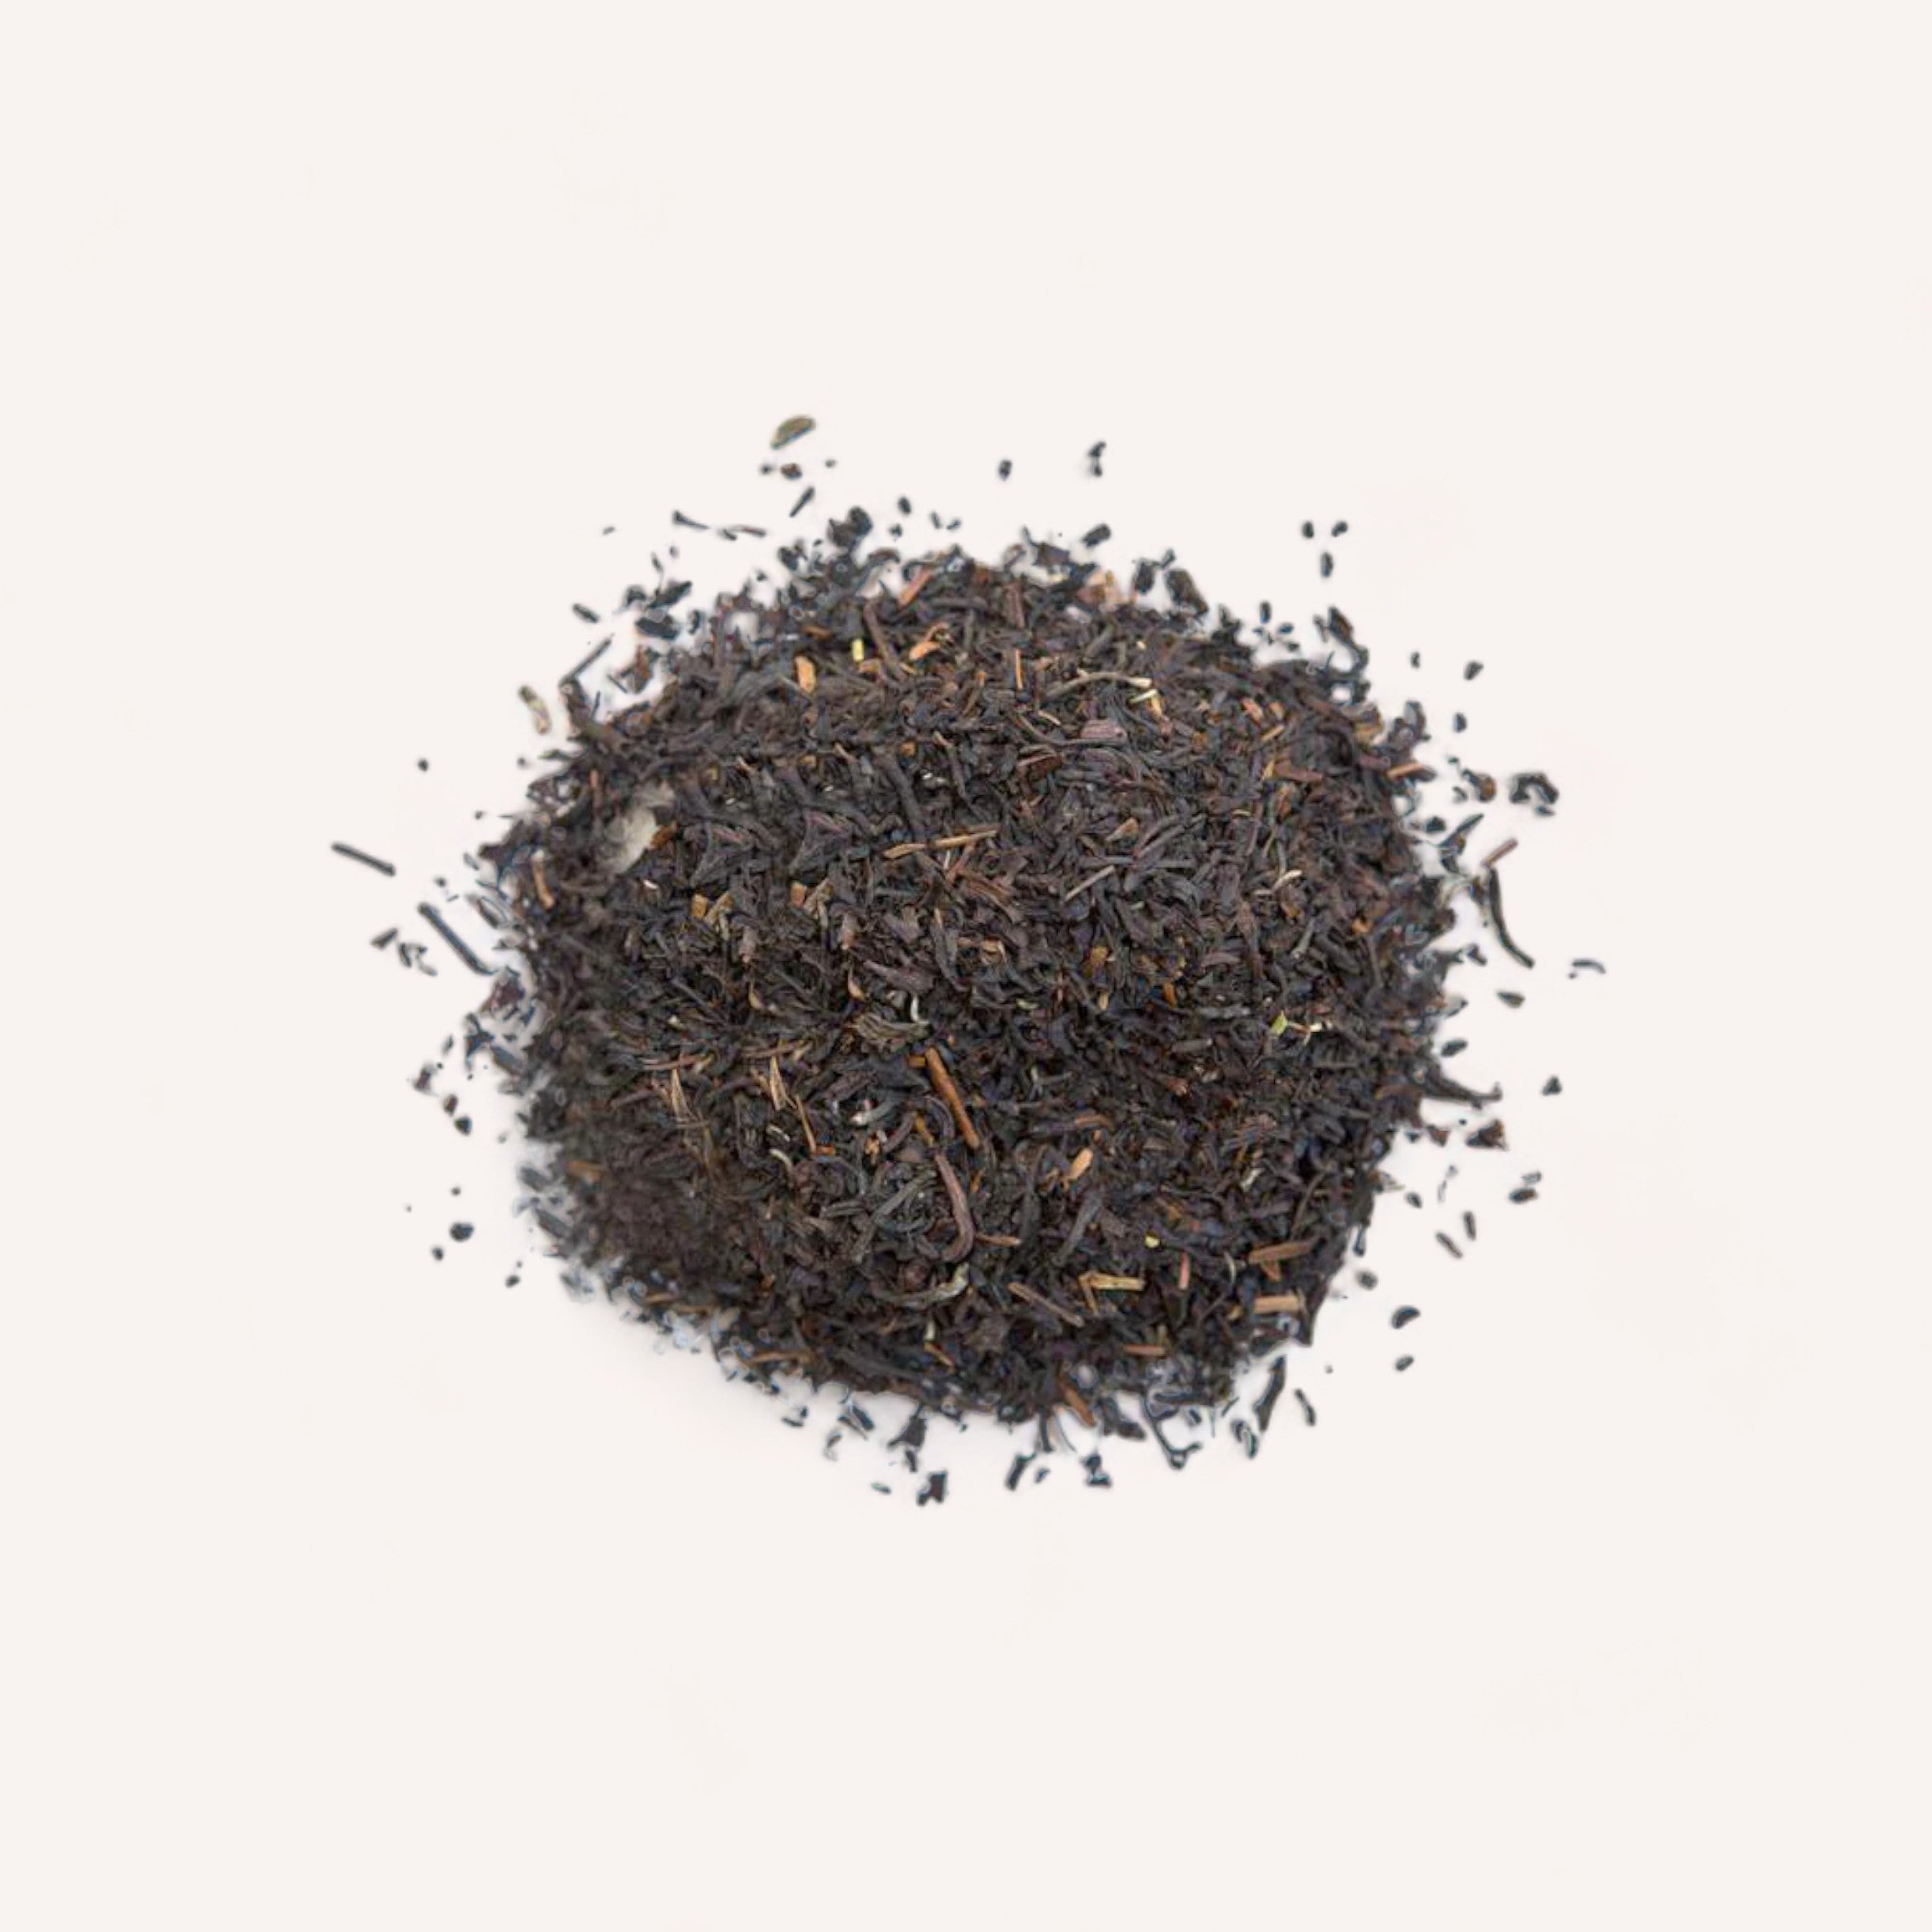 A mound of Earl Grey Tea by Forage + Bloom loose-leaf black tea isolated on a white background.